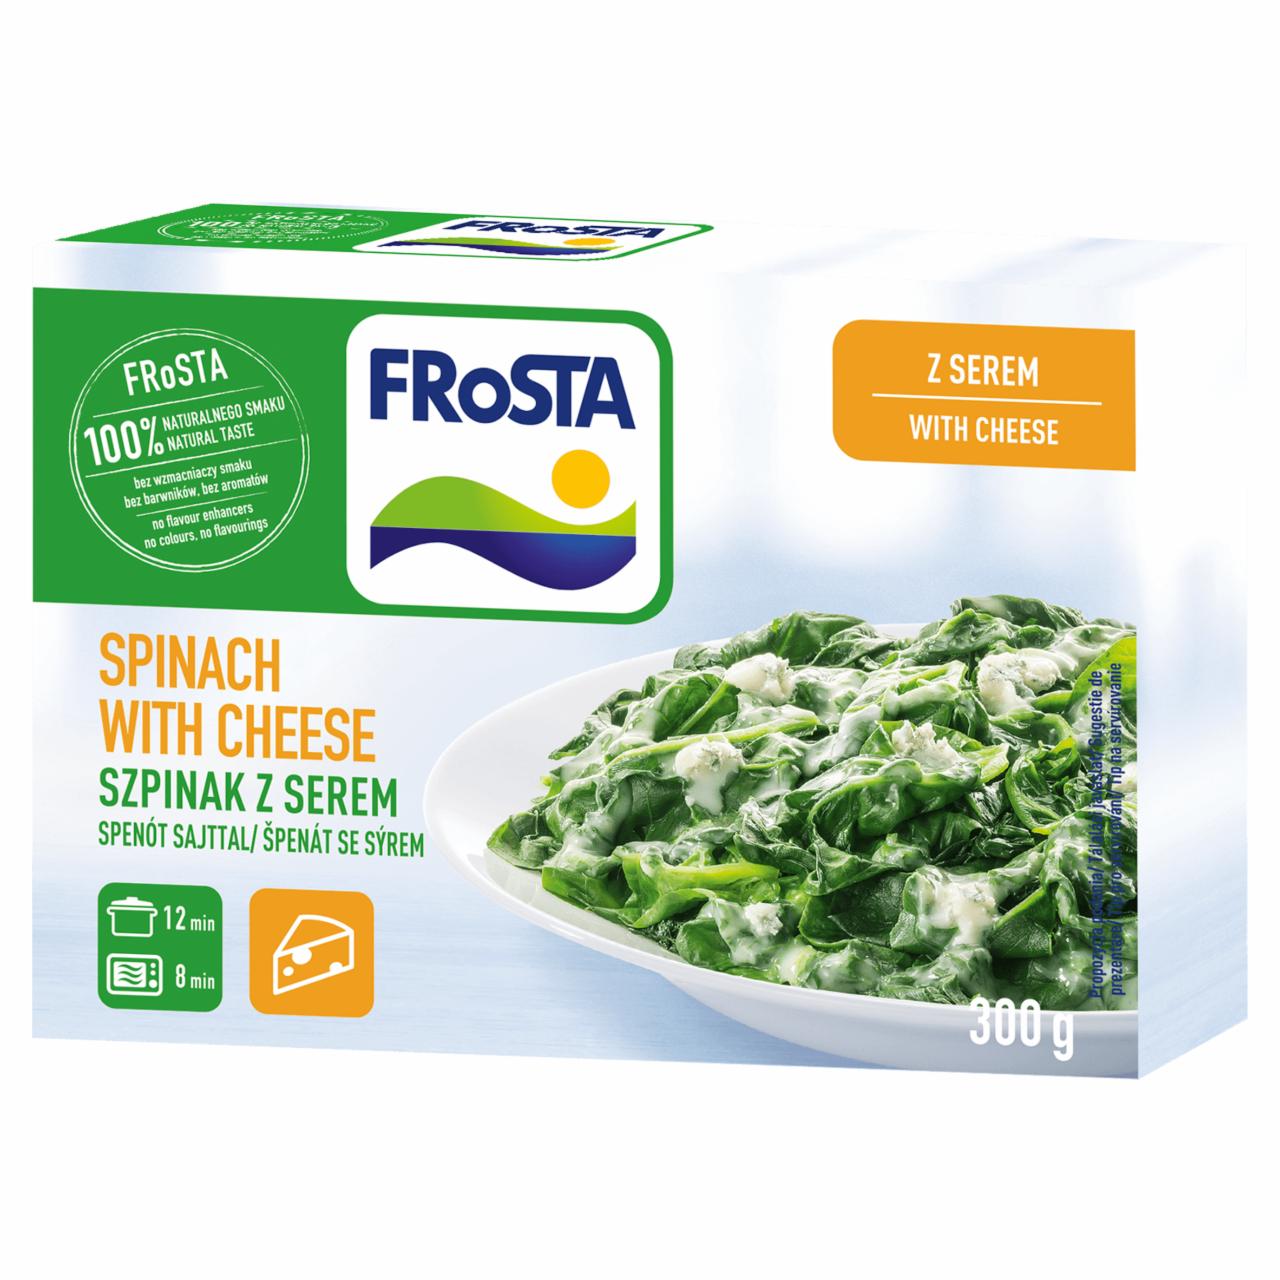 Photo - FRoSTA Quick-Frozen Spinach with Cheese 300 g